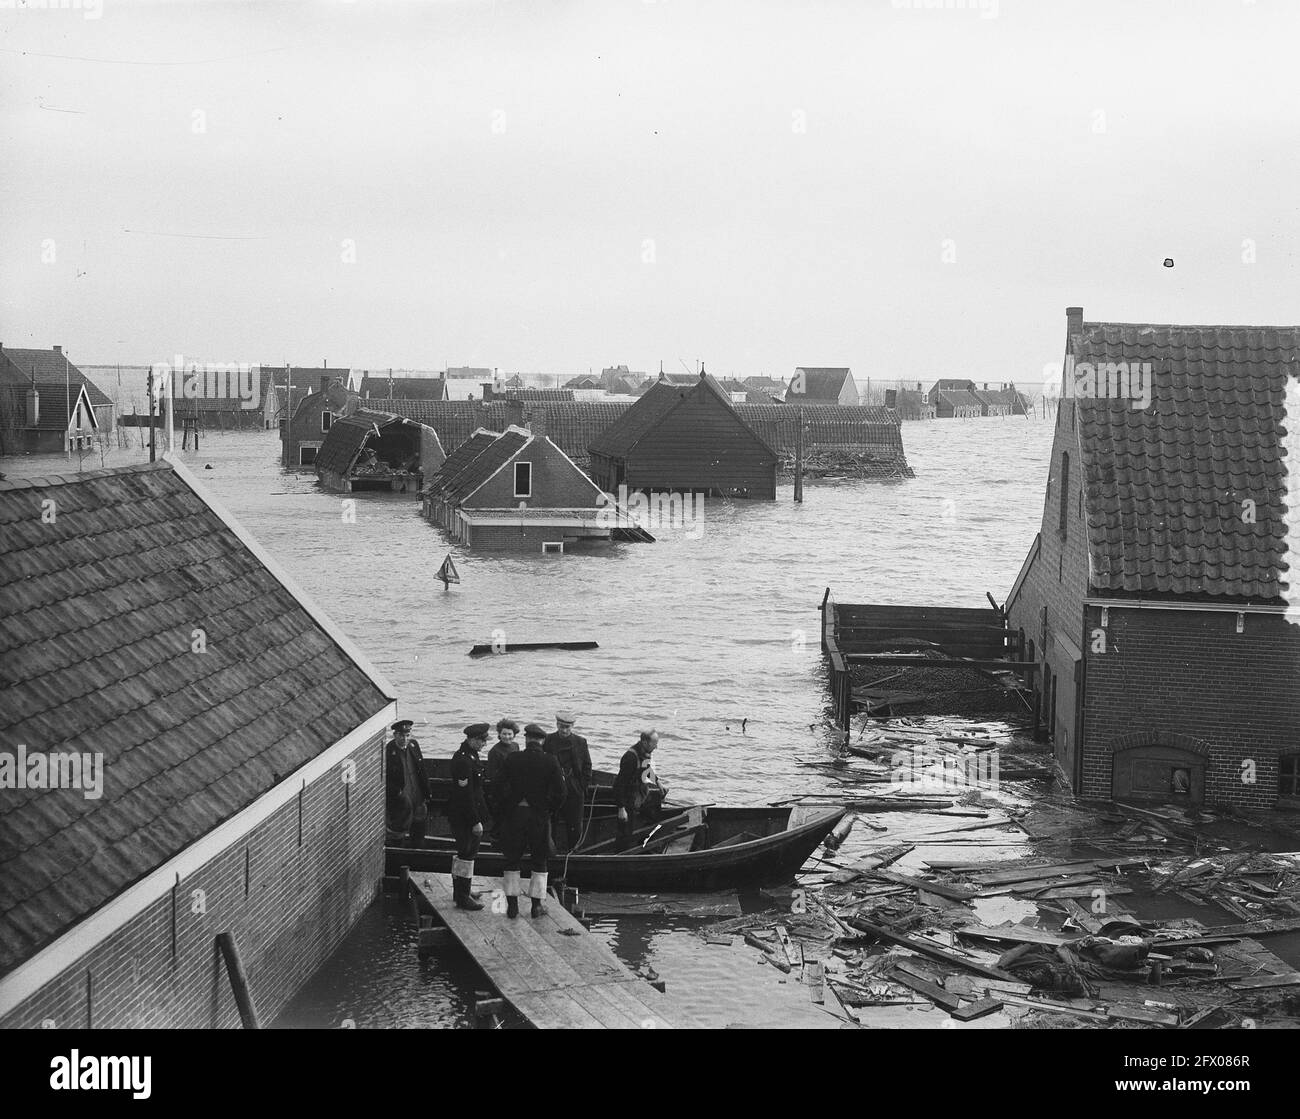 Schouwen Duiveland. Nieuwerkerk . Overview, April 2, 1953, floods, overviews, The Netherlands, 20th century press agency photo, news to remember, documentary, historic photography 1945-1990, visual stories, human history of the Twentieth Century, capturing moments in time Stock Photo